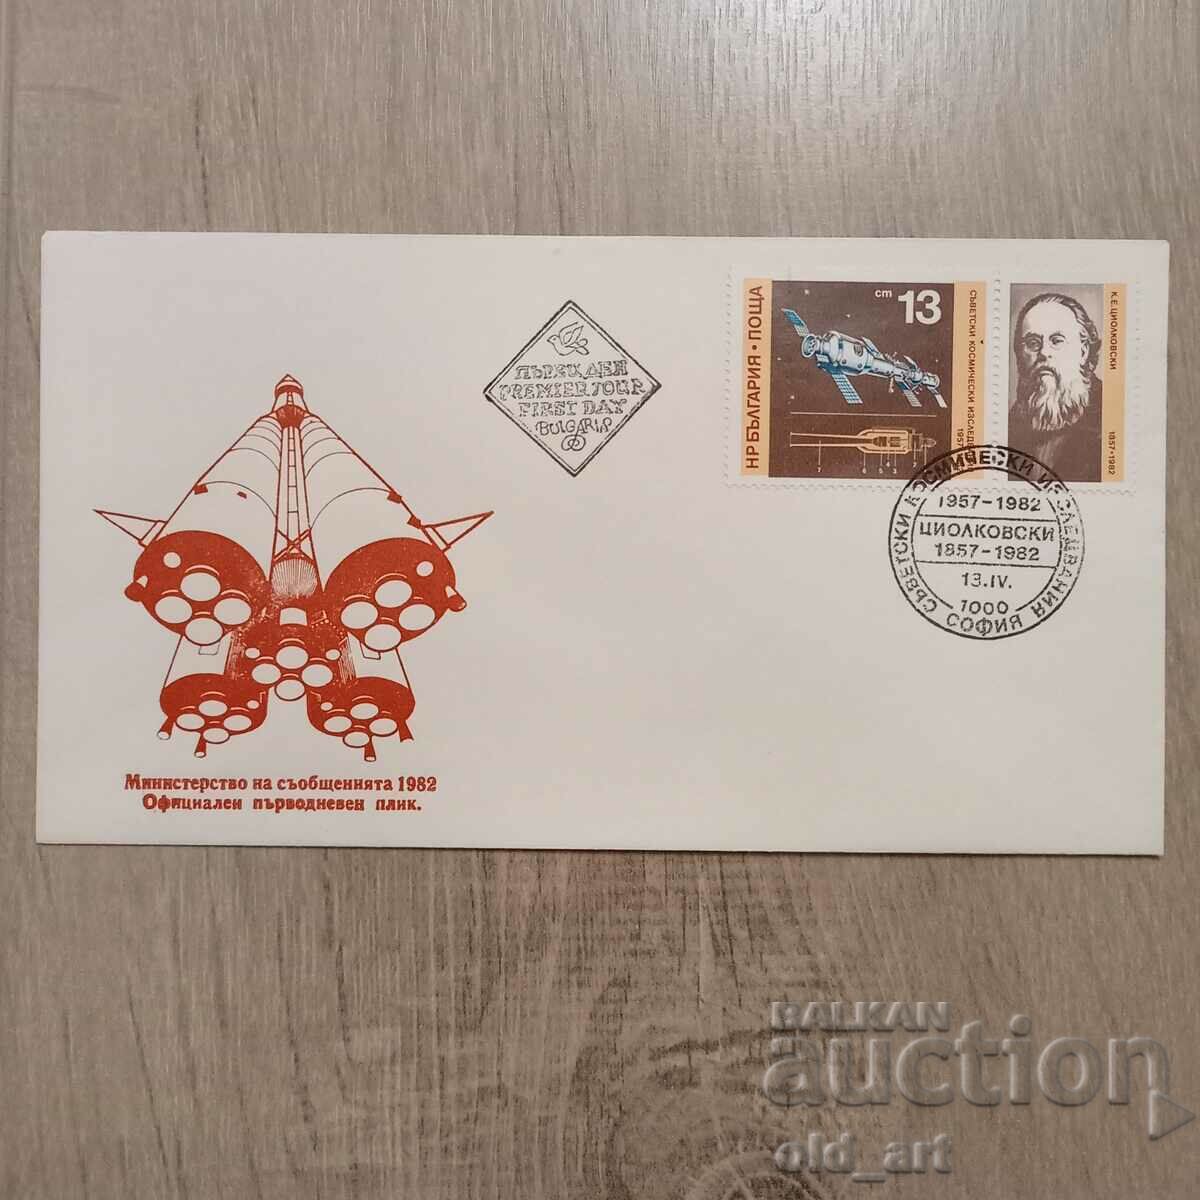 Mailing envelope - Soviet space research